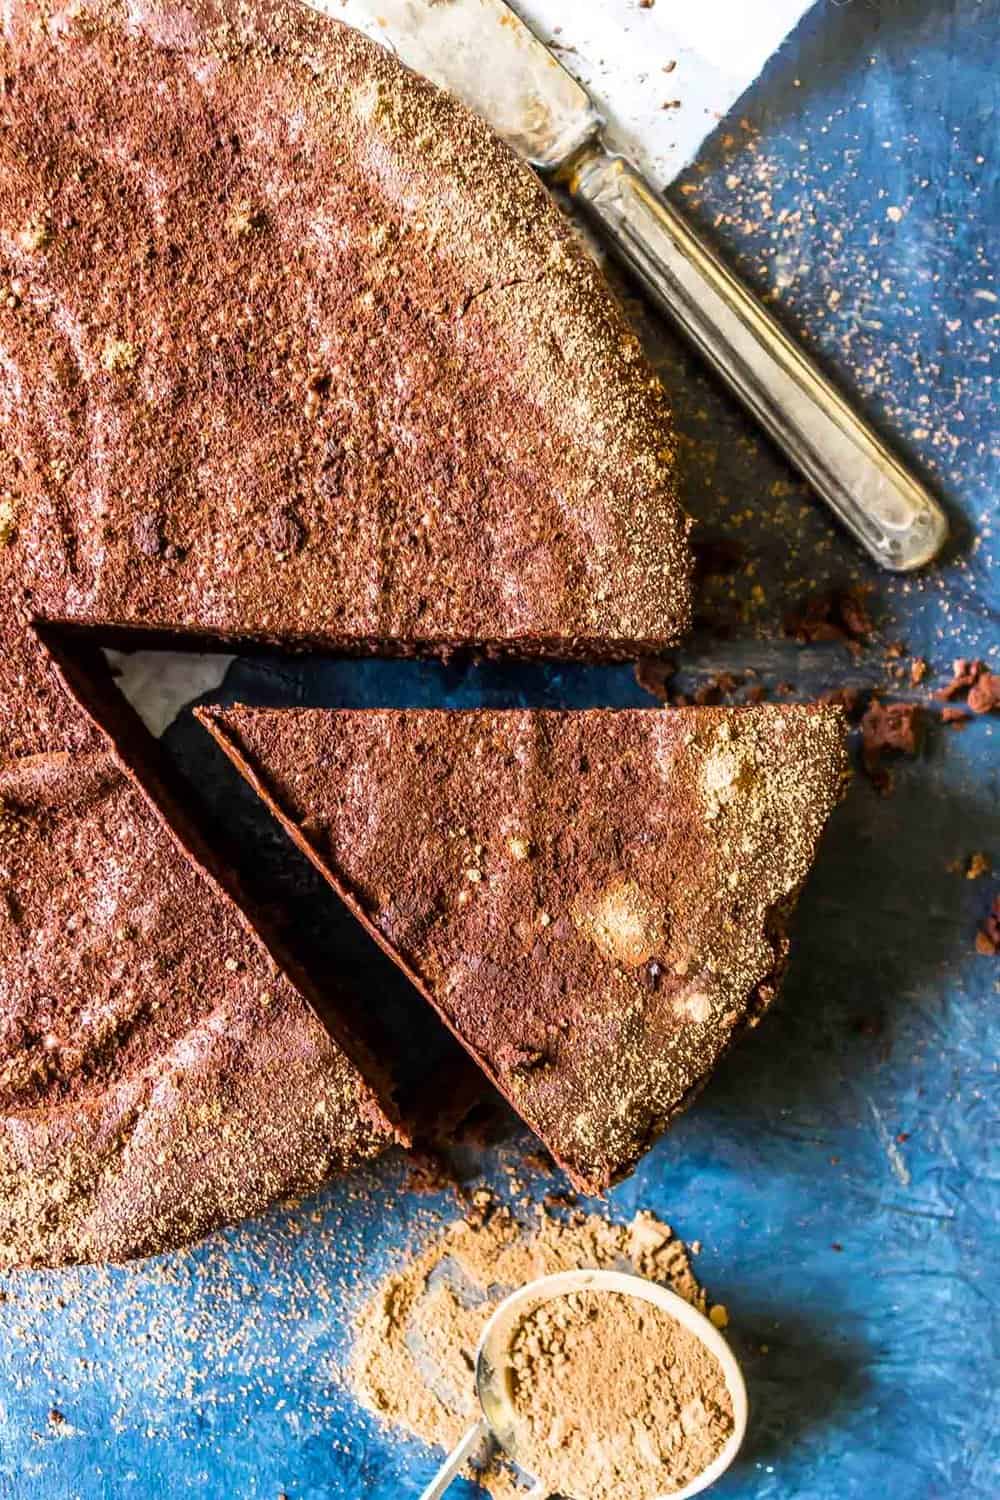 Chocolate torte with a single slice cut out and slide away from the center of the torte.